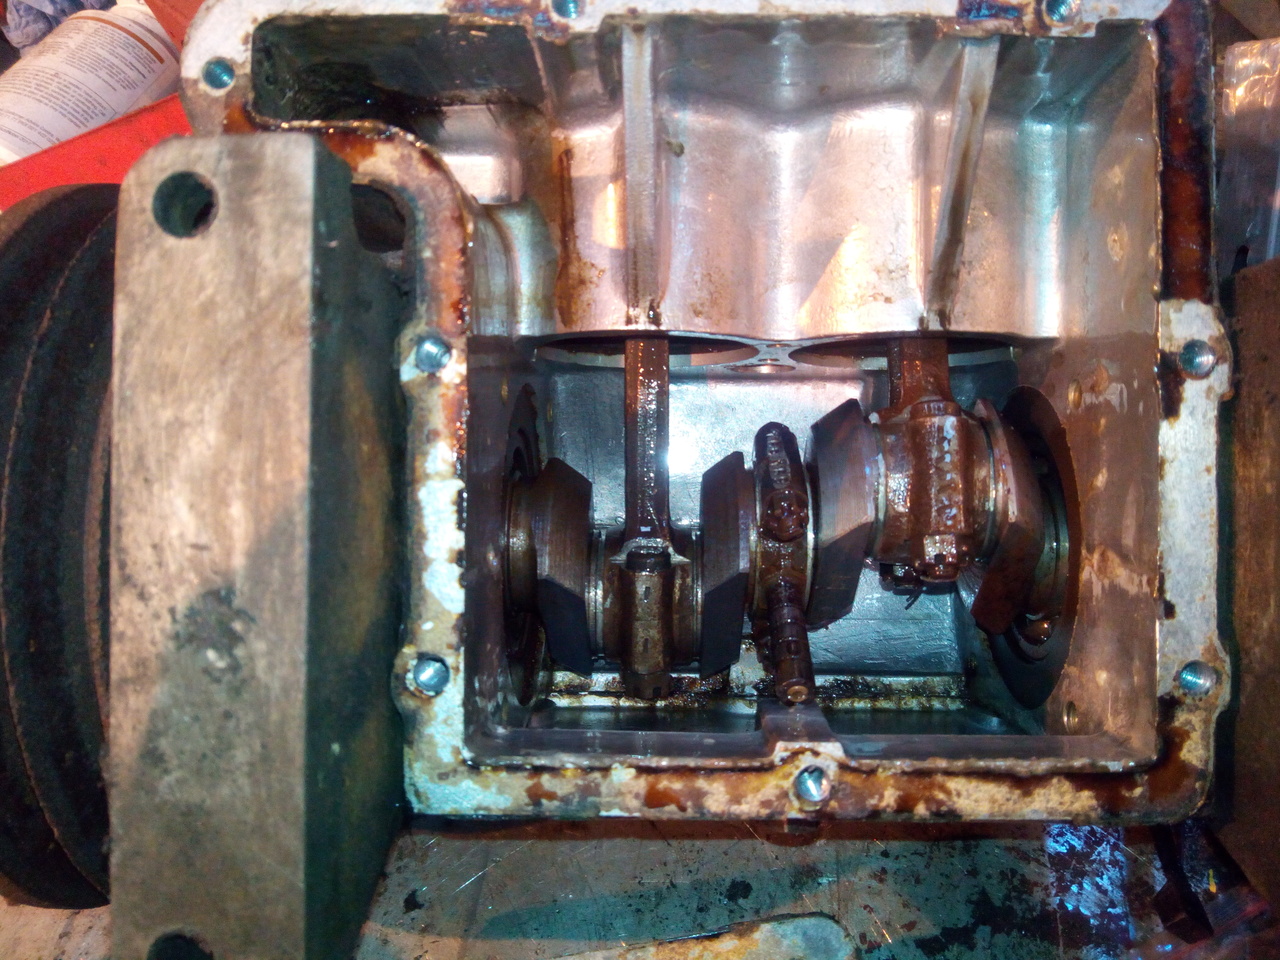 An inside view of the compressor's crank-case, showing the two
connecting rods and the eccentric oilpump